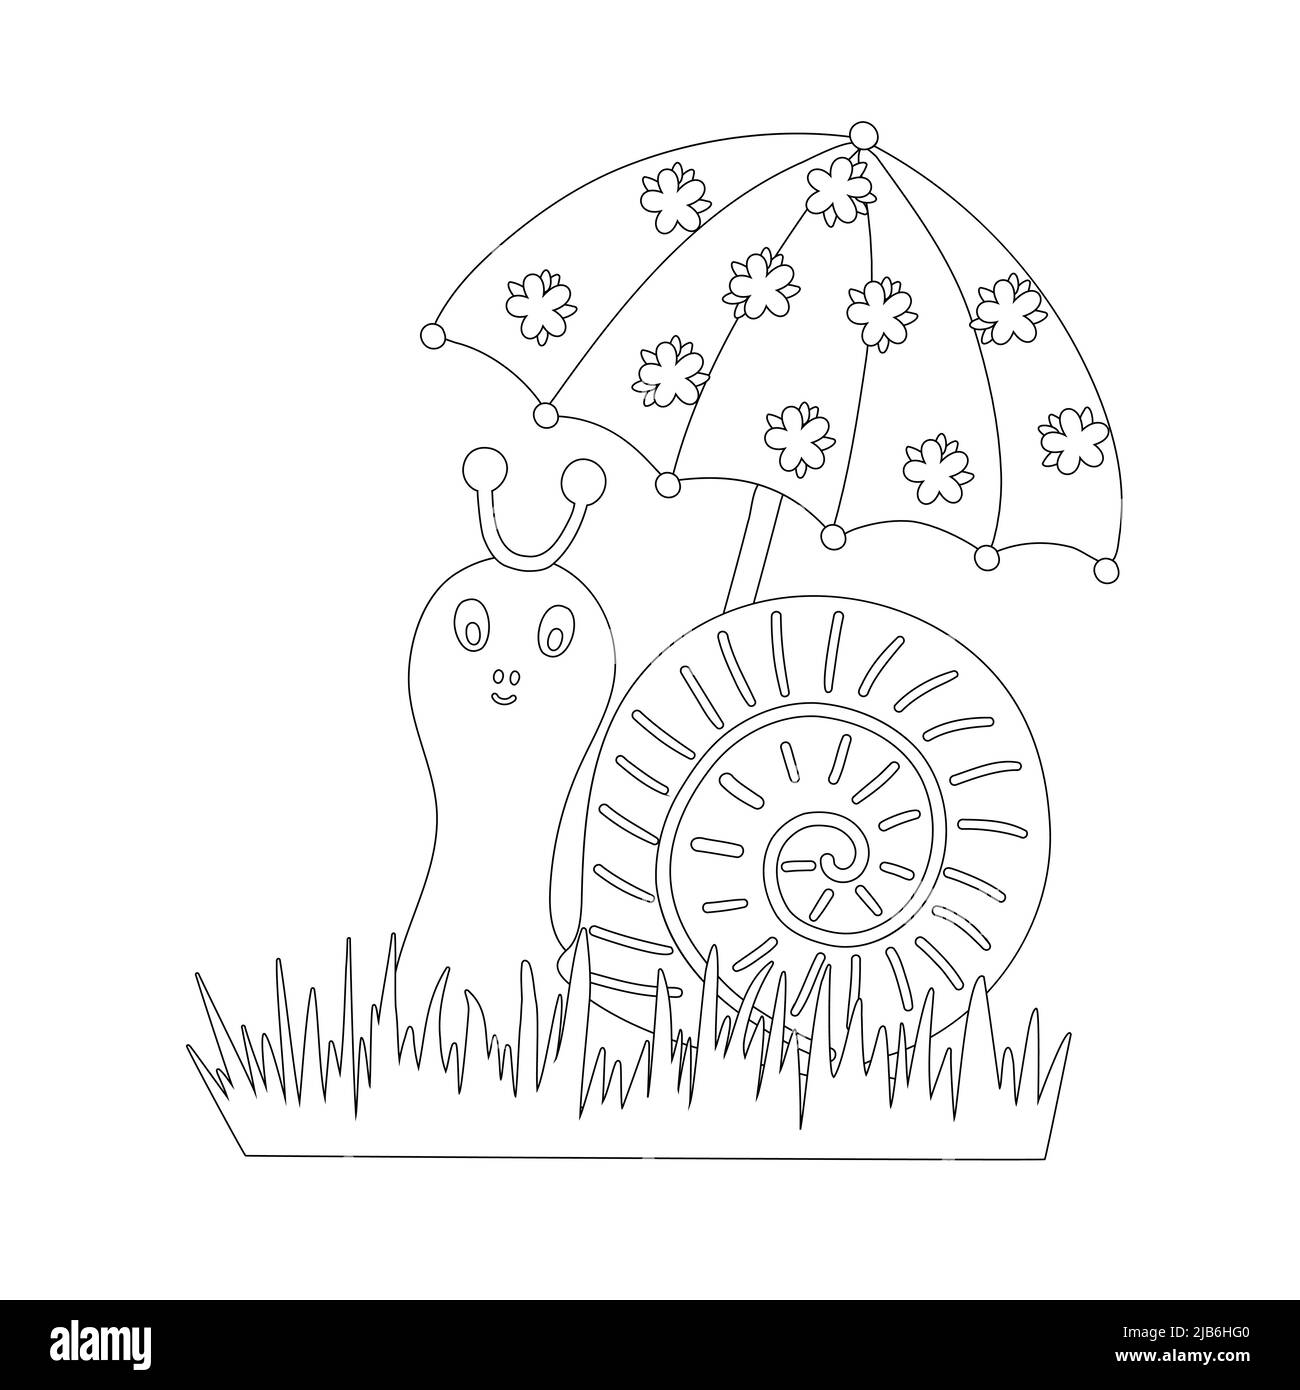 Cute snail with decorated umbrella simple outline cartoon coloring page vector illustration, wild animal funny character for kids leisure activity, worksheet Stock Vector